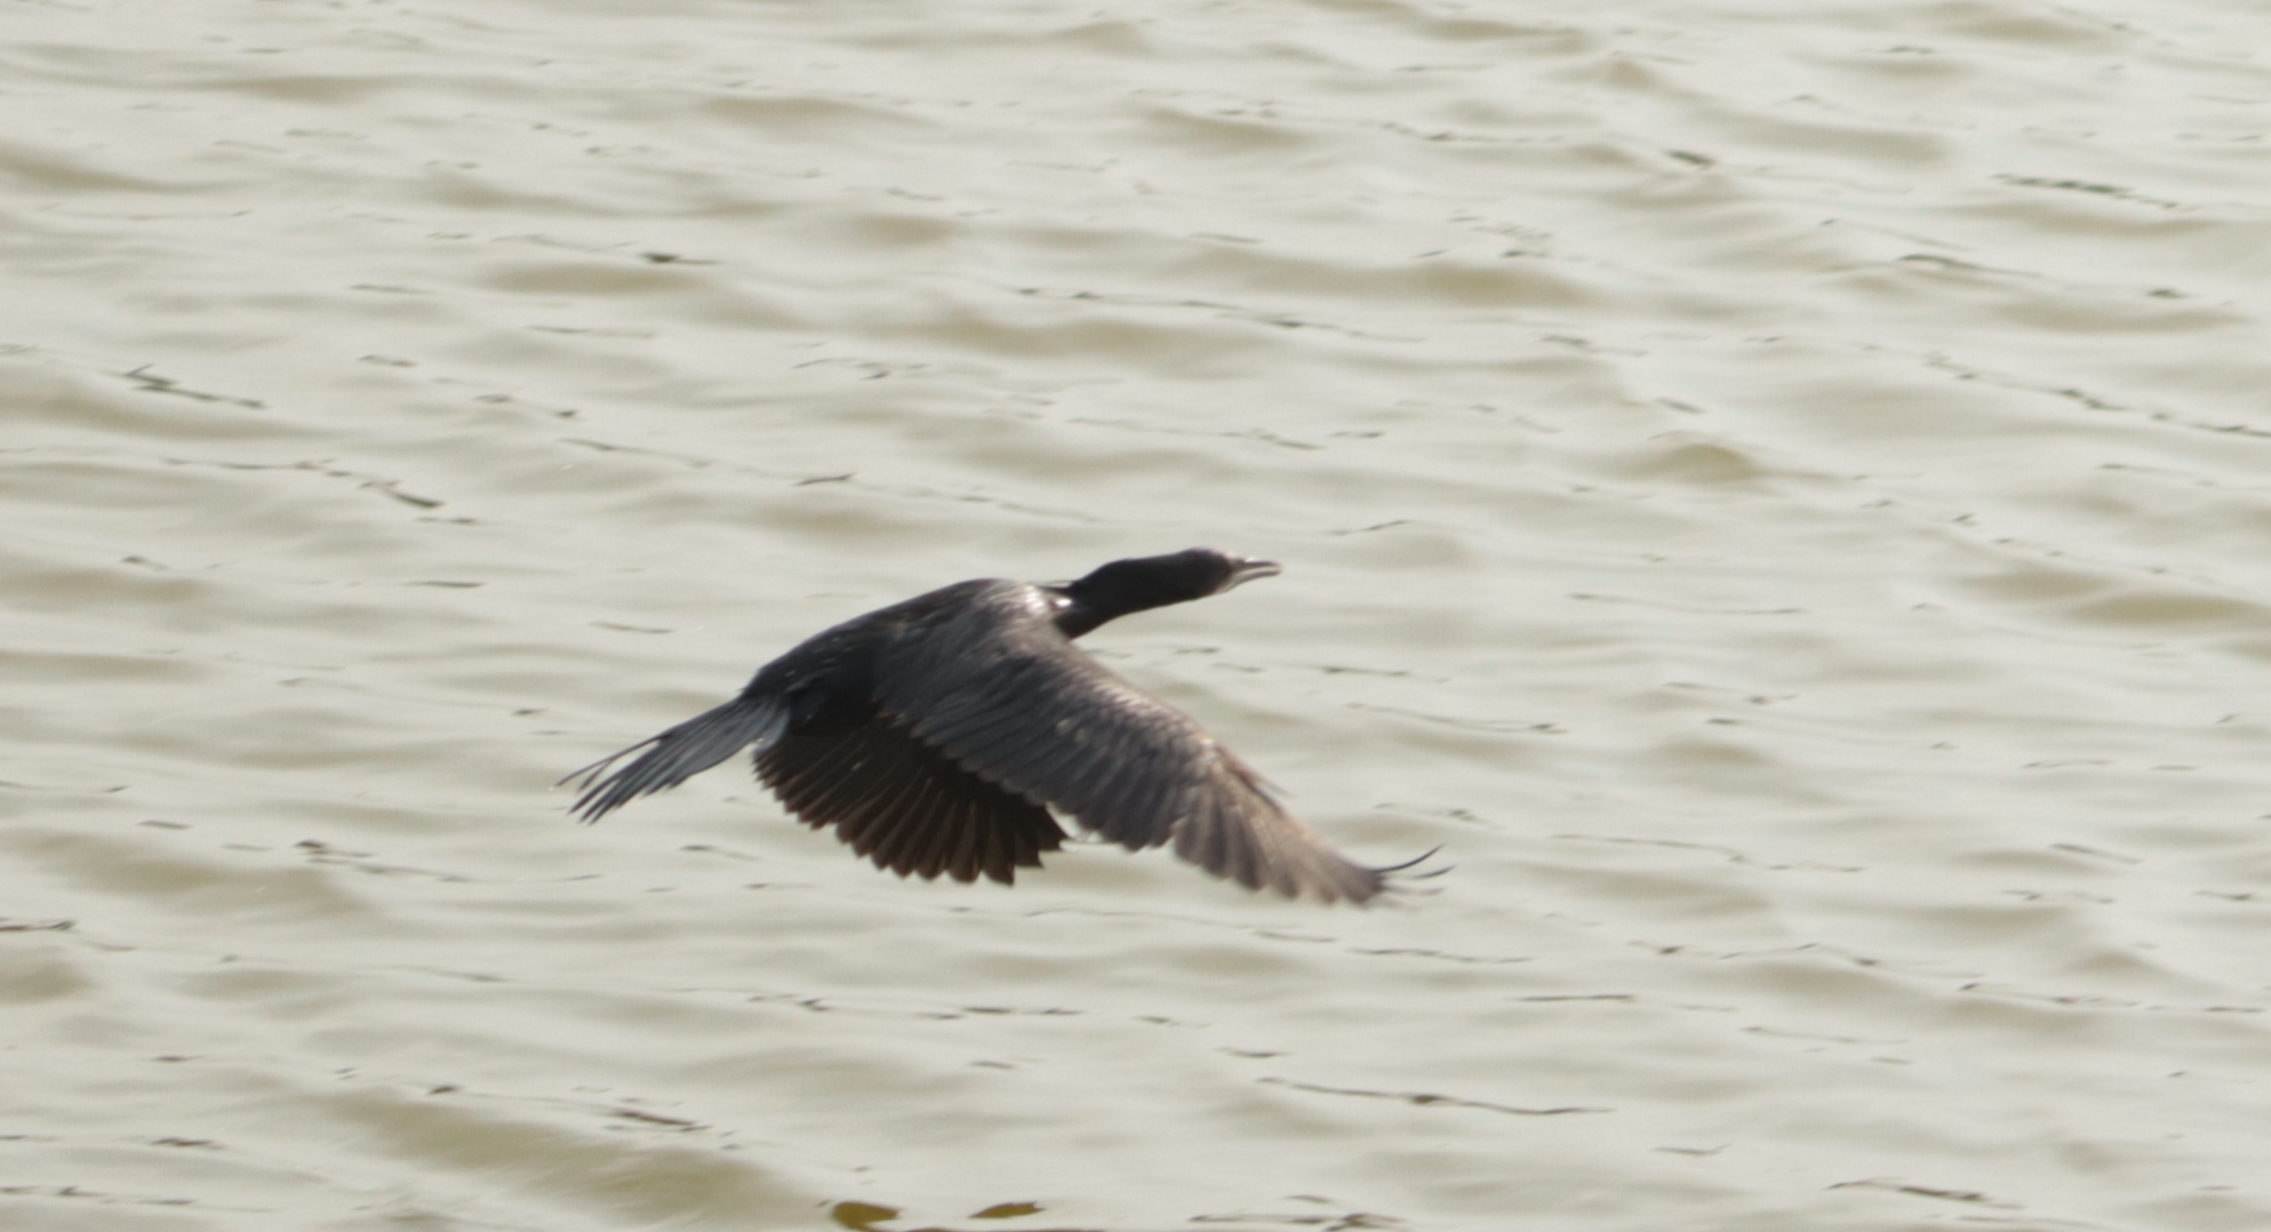 A water bird flying over a river